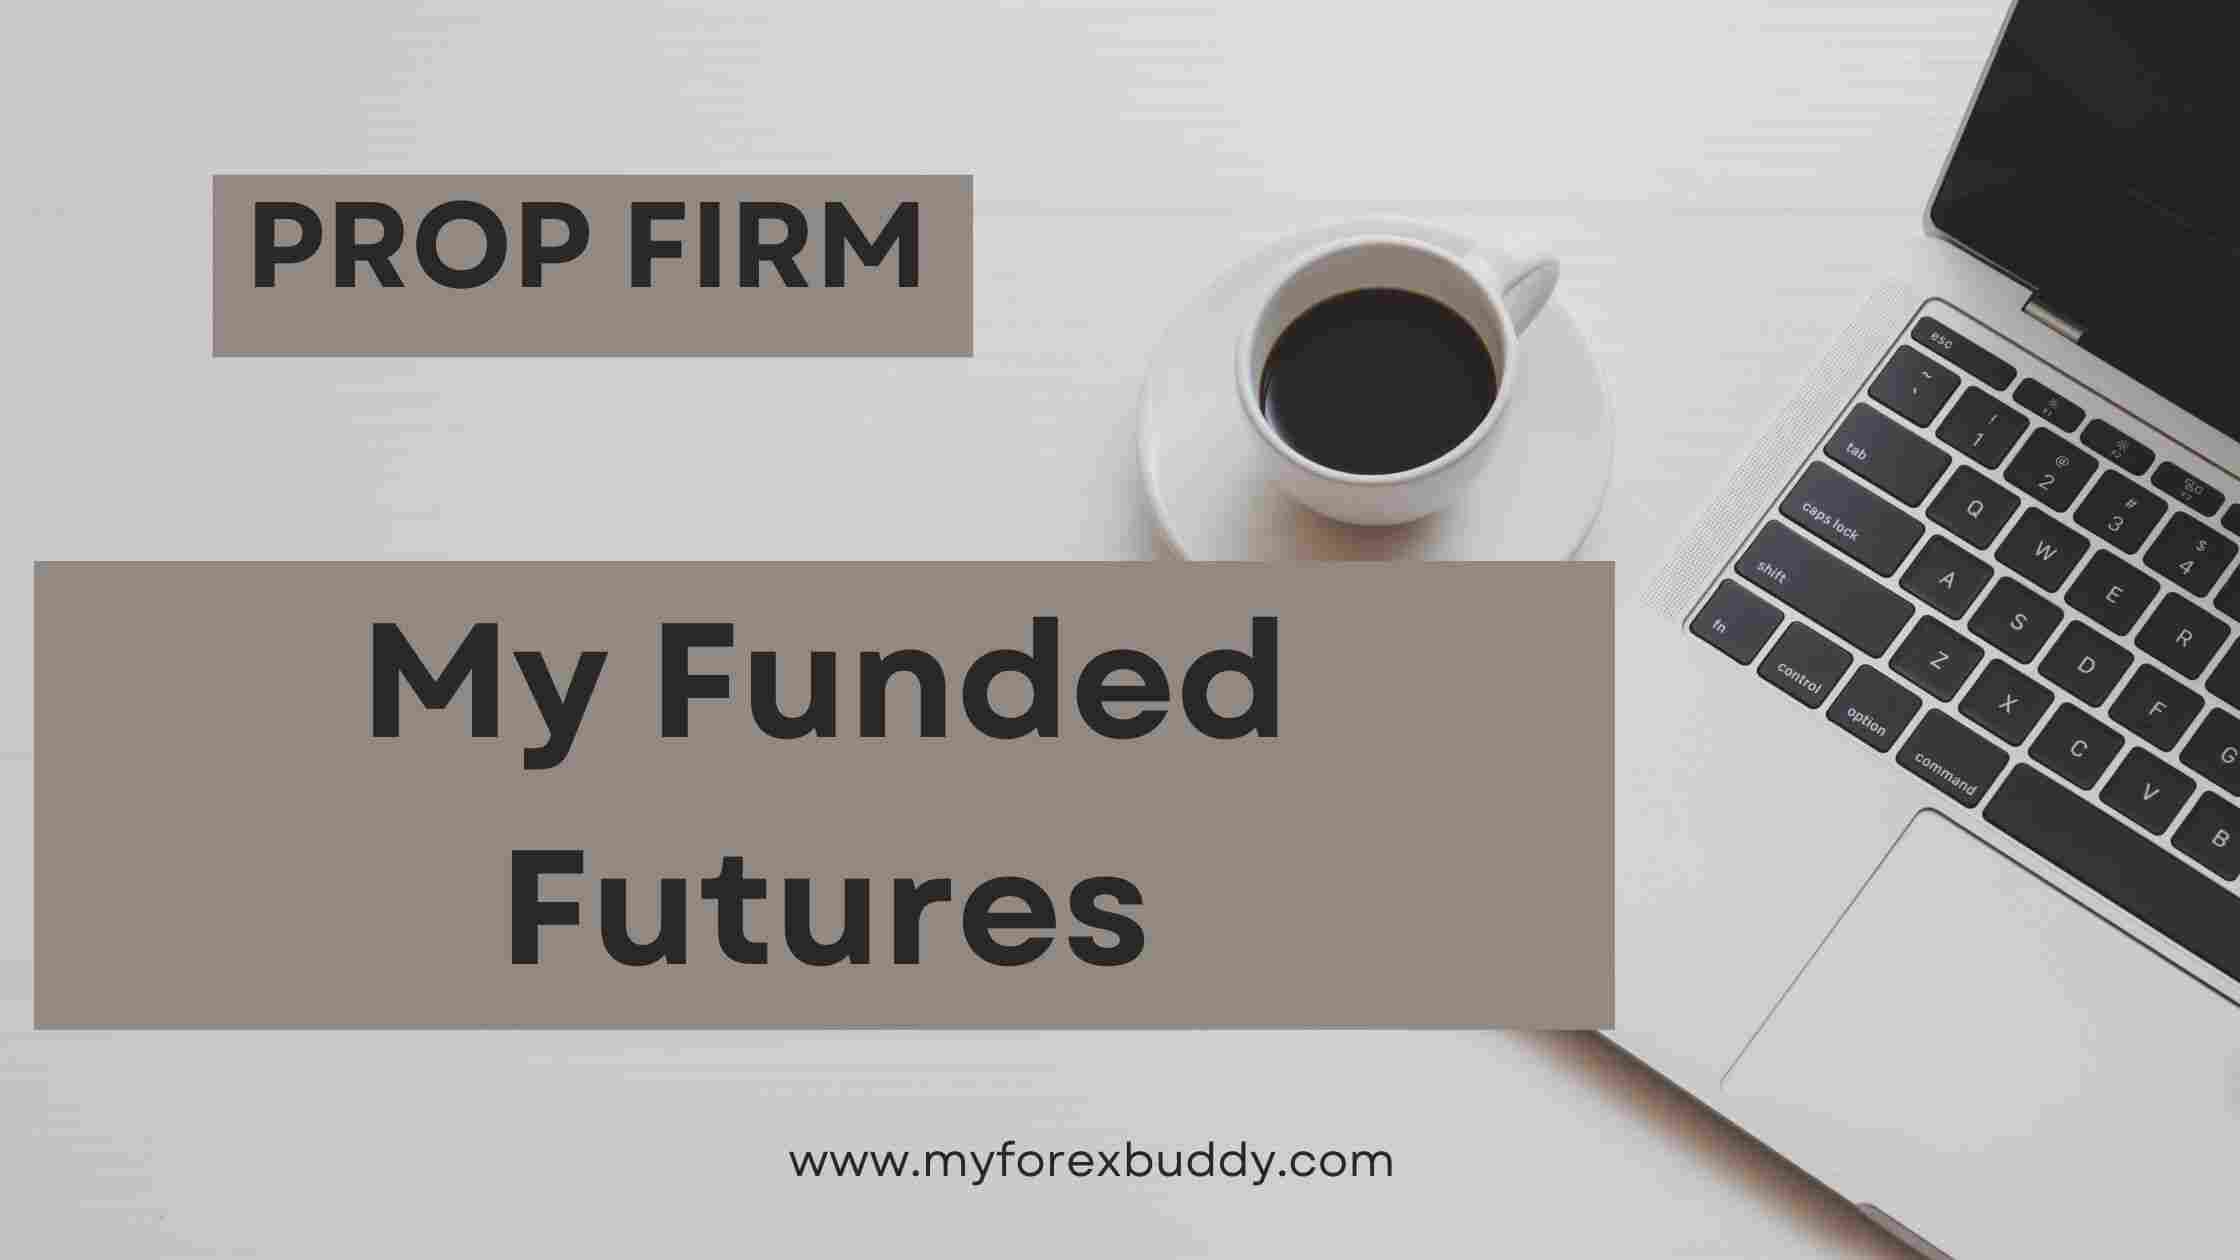 My Funded Futures Strives for Genuine Improvement: 4 NEW UPDATES in this Futures Prop Firm